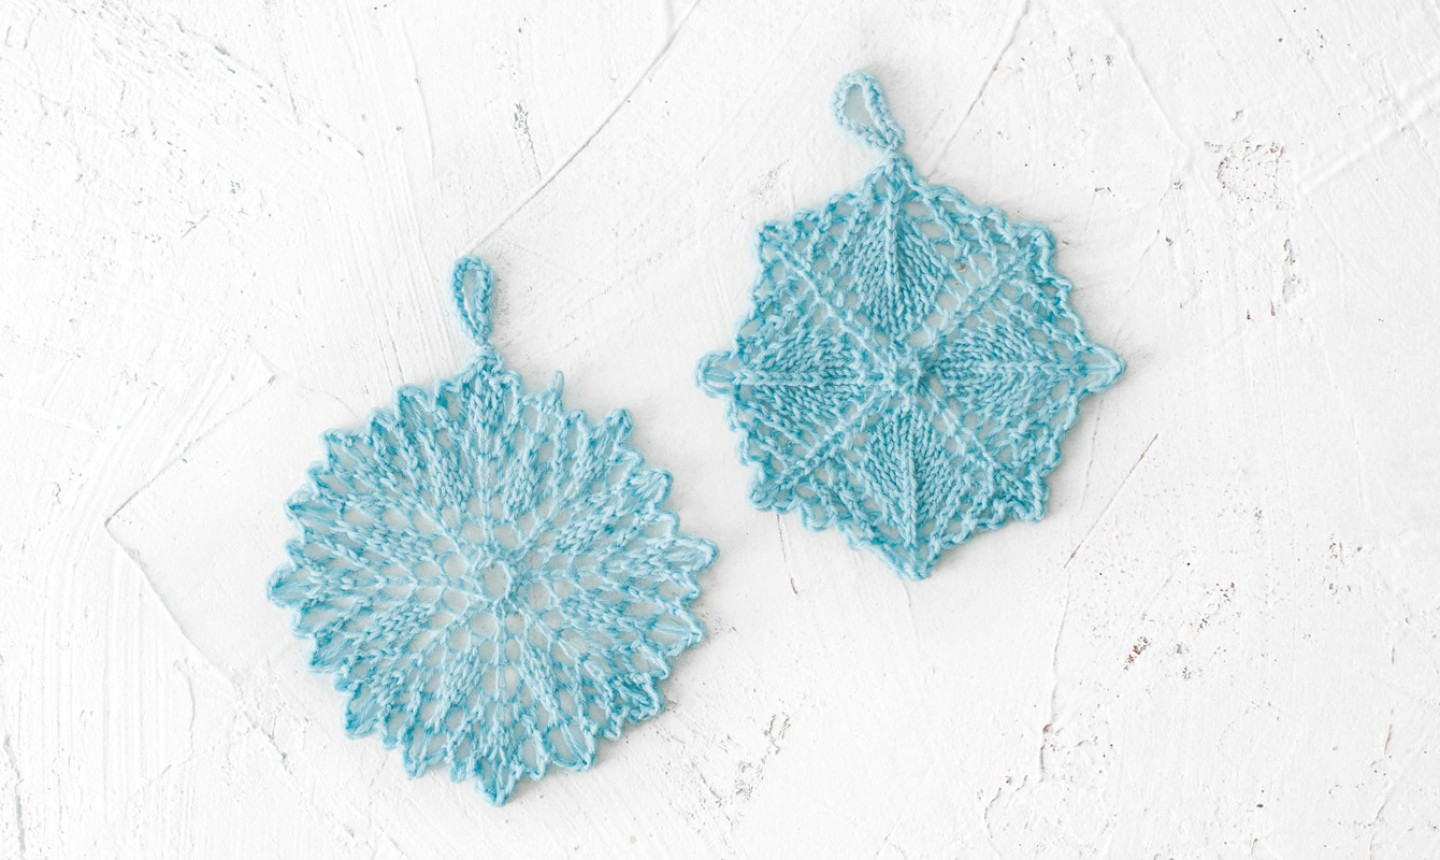 Snowflake Pattern Knitting Let It Snow With Cozy Knit Snowflakes Free Pattern Alert